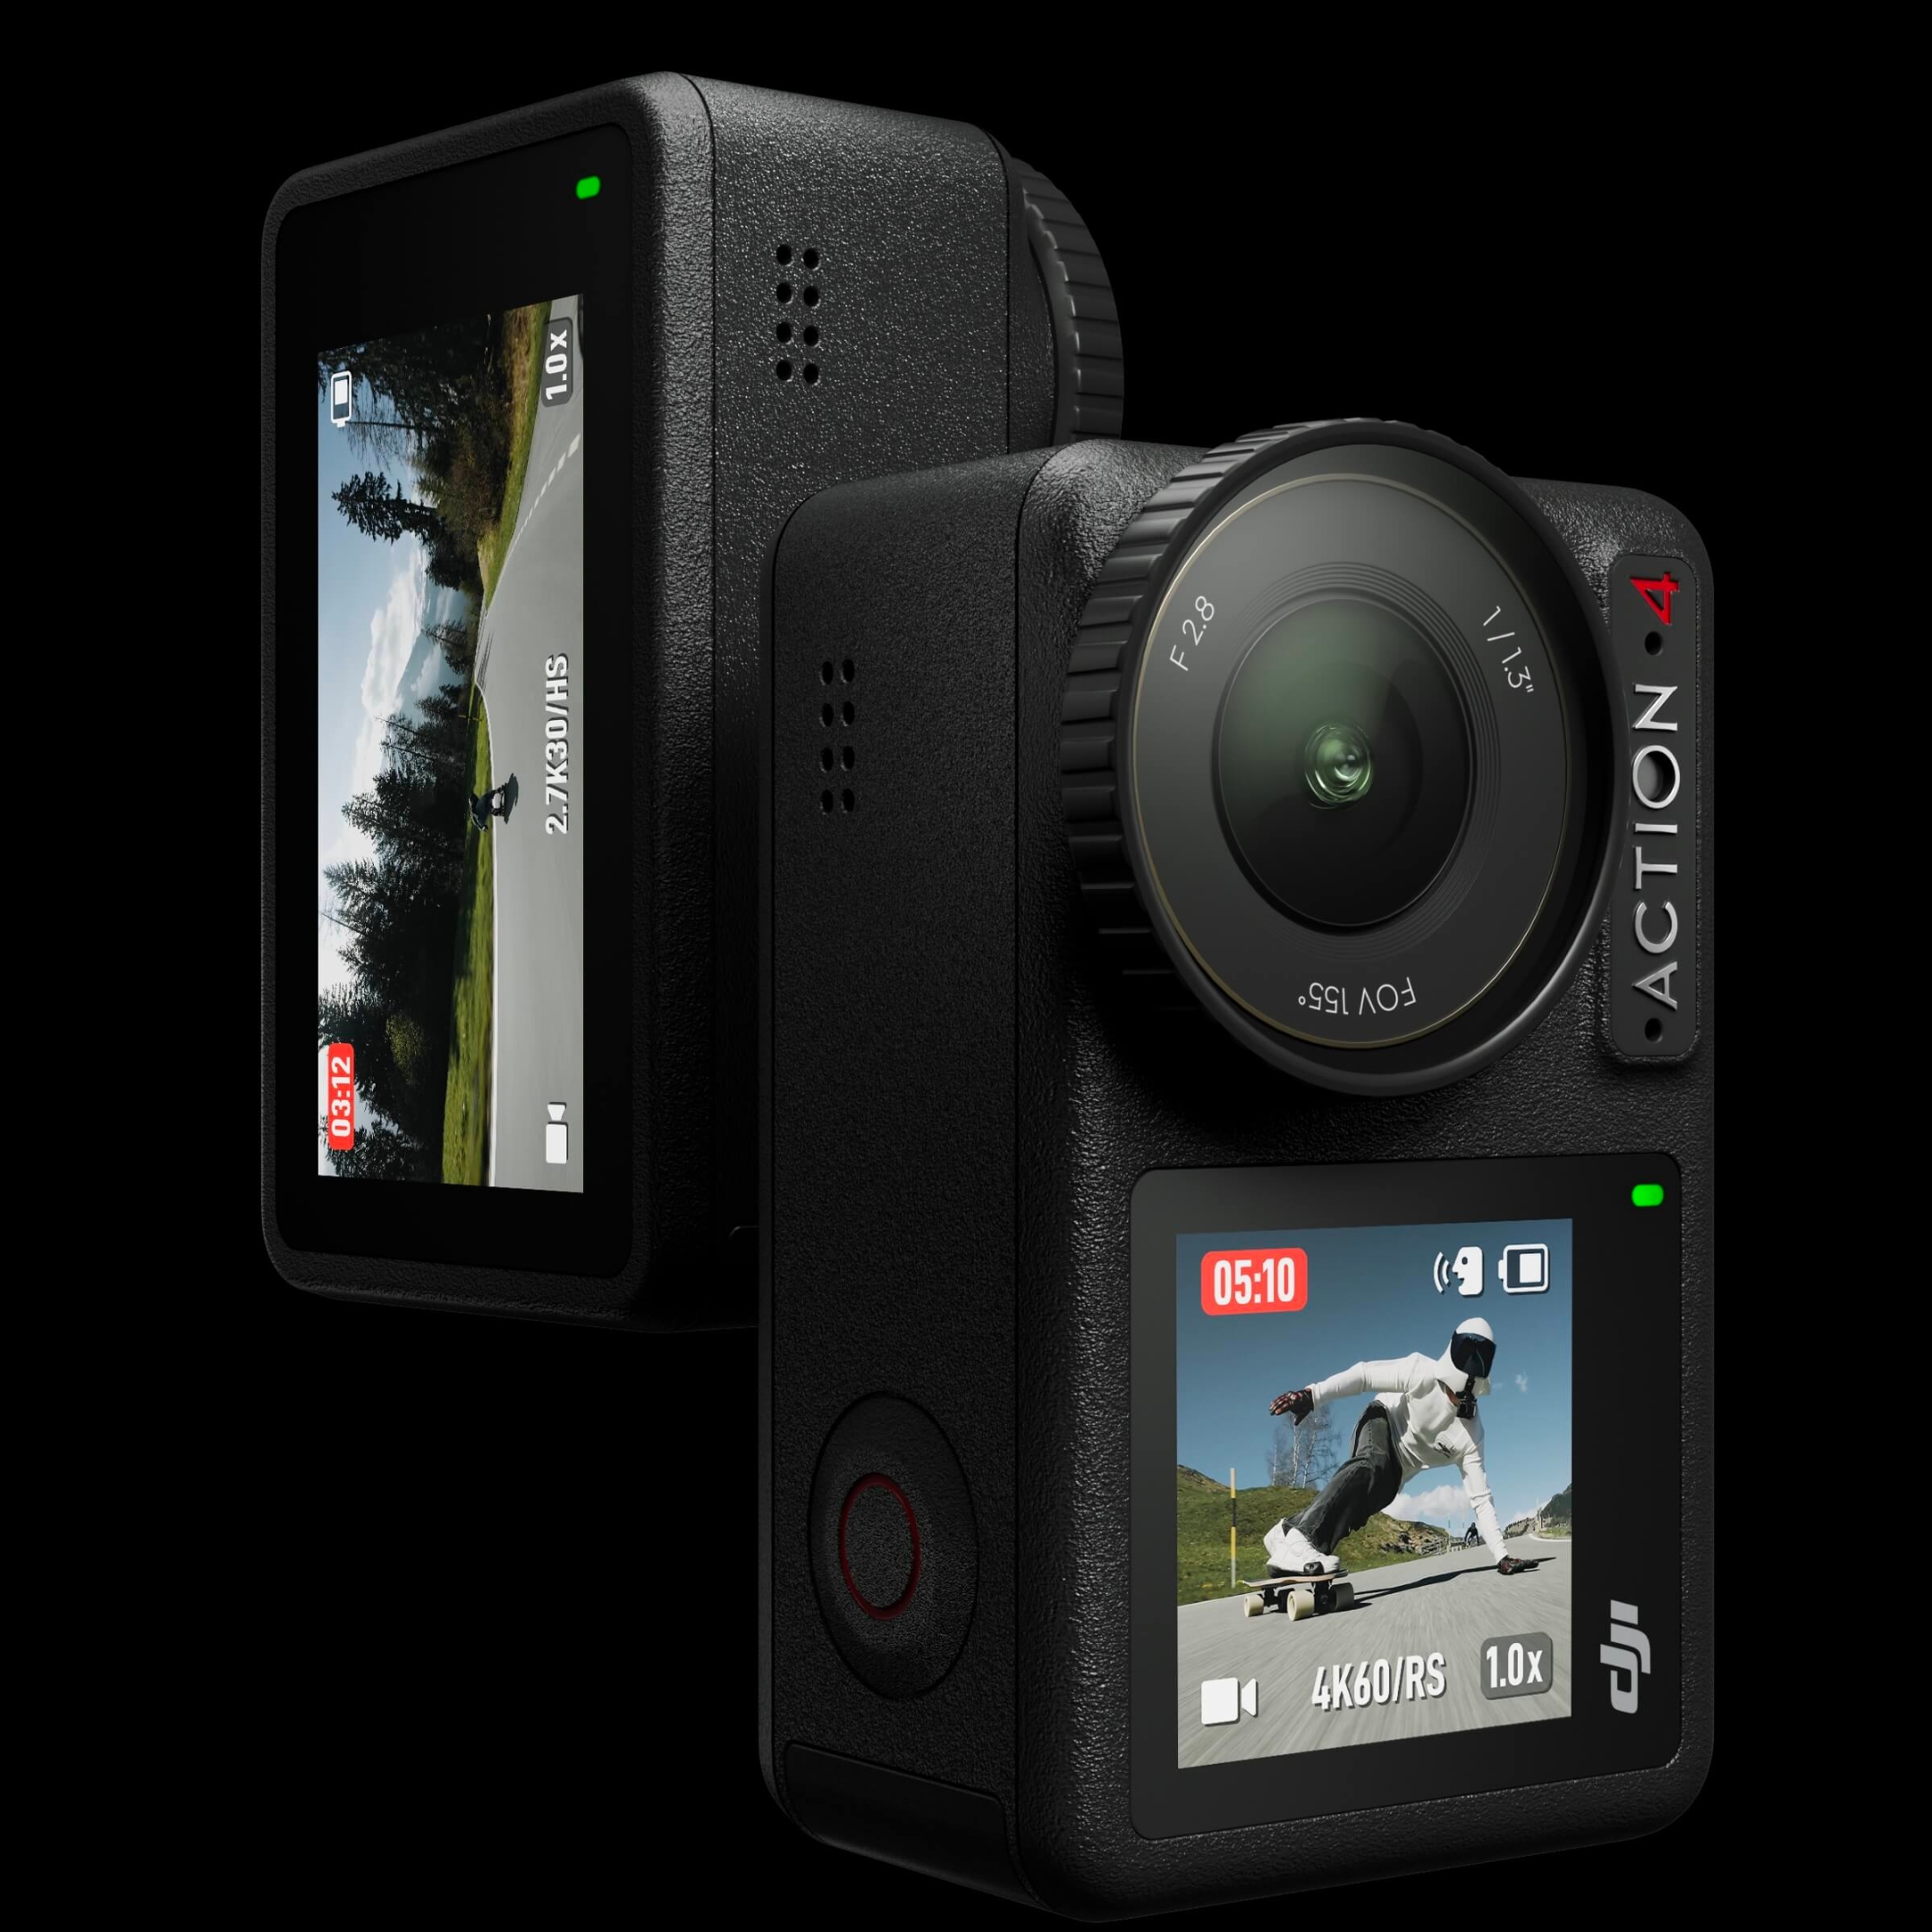 DJI Osmo Action 4 Standard Combo, Action Cameras